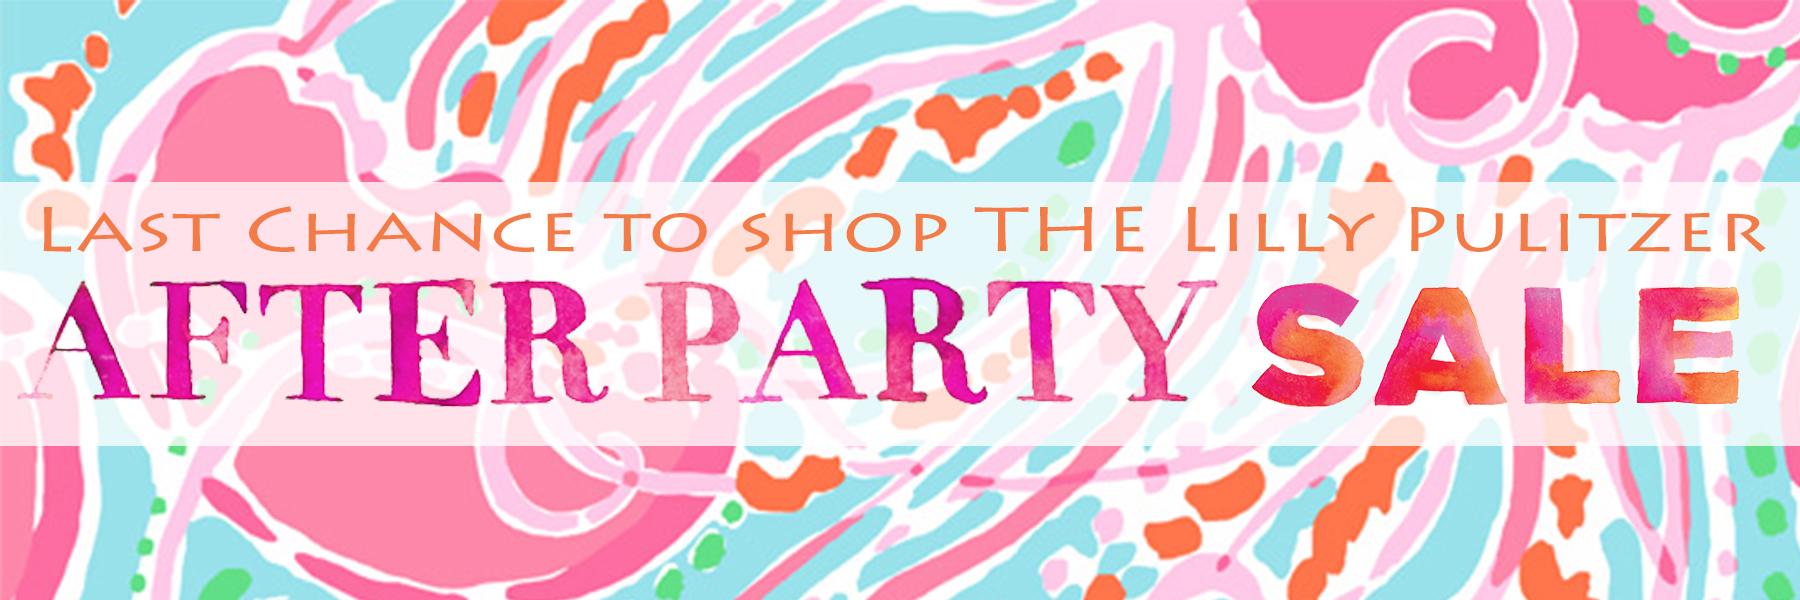 lilly pulitzer after party sale